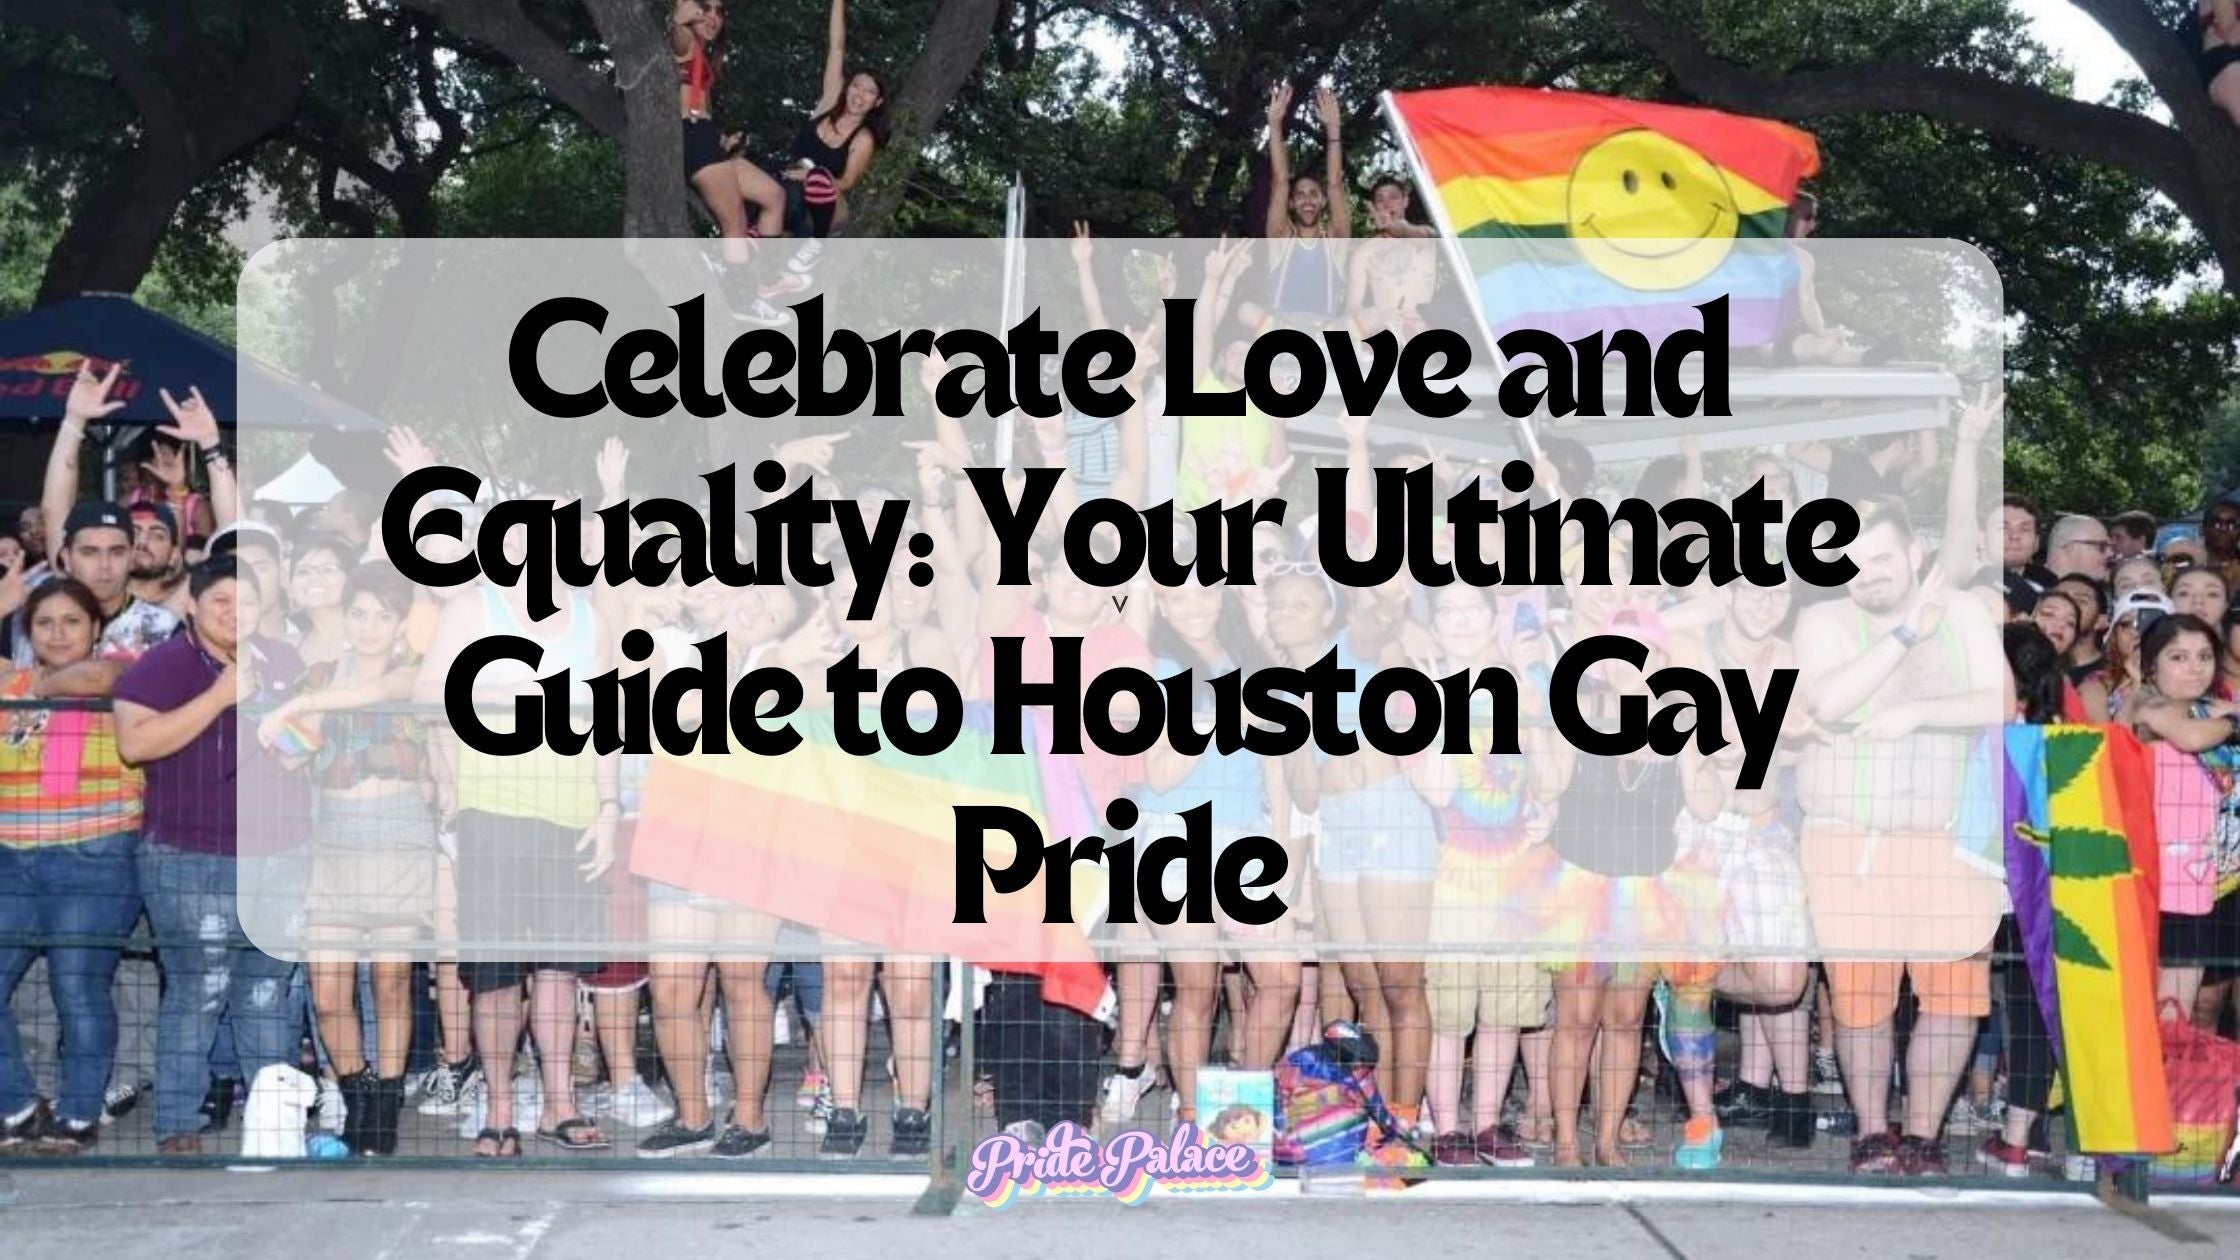 Celebrate Love and Equality: Your Ultimate Guide to Houston Gay Pride